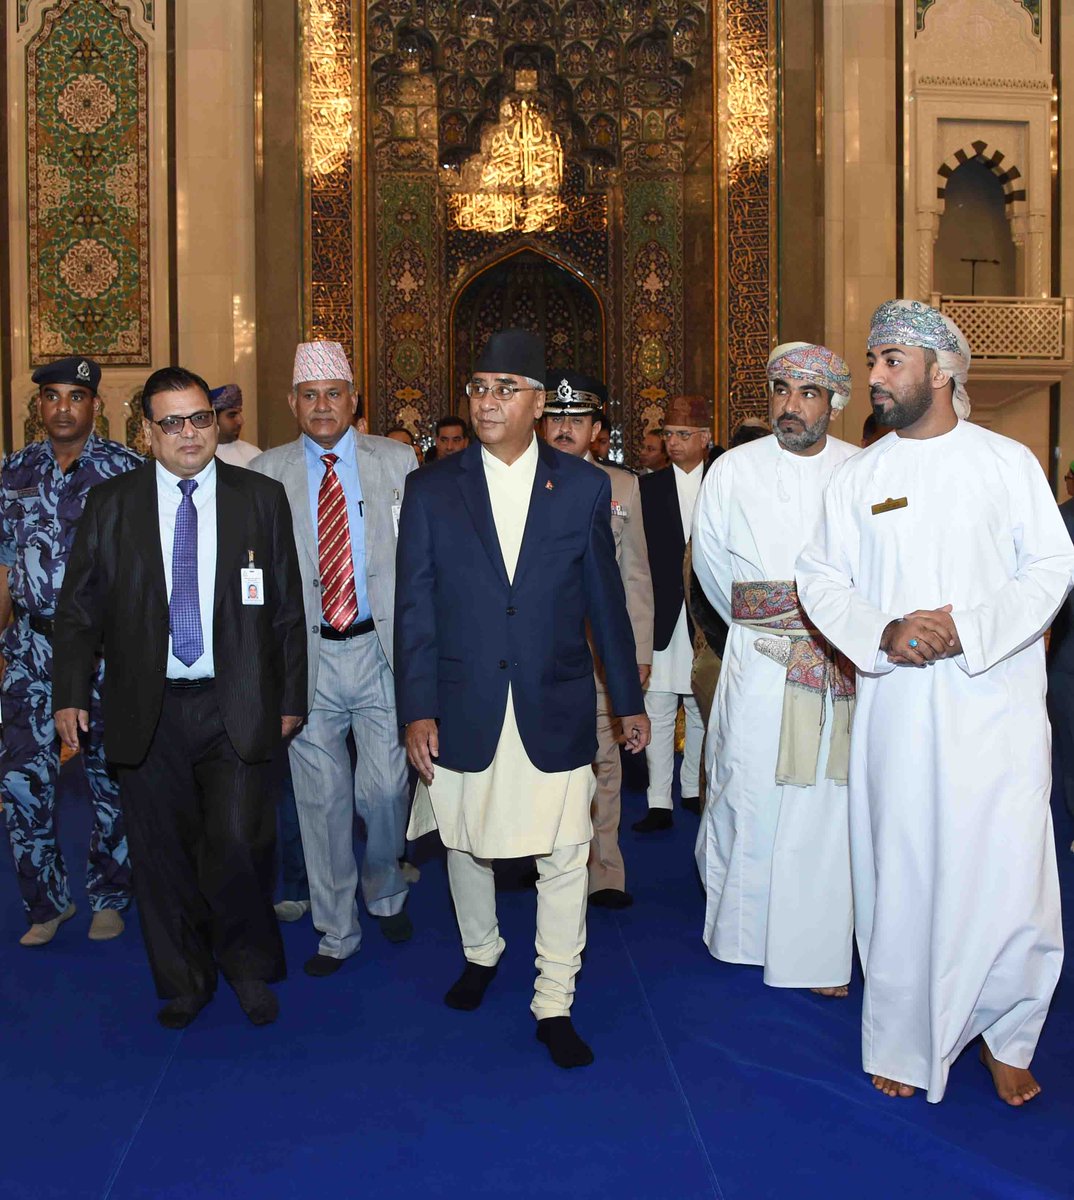 Nepal Prime Minister visits Sultan Qaboos Grand Mosque